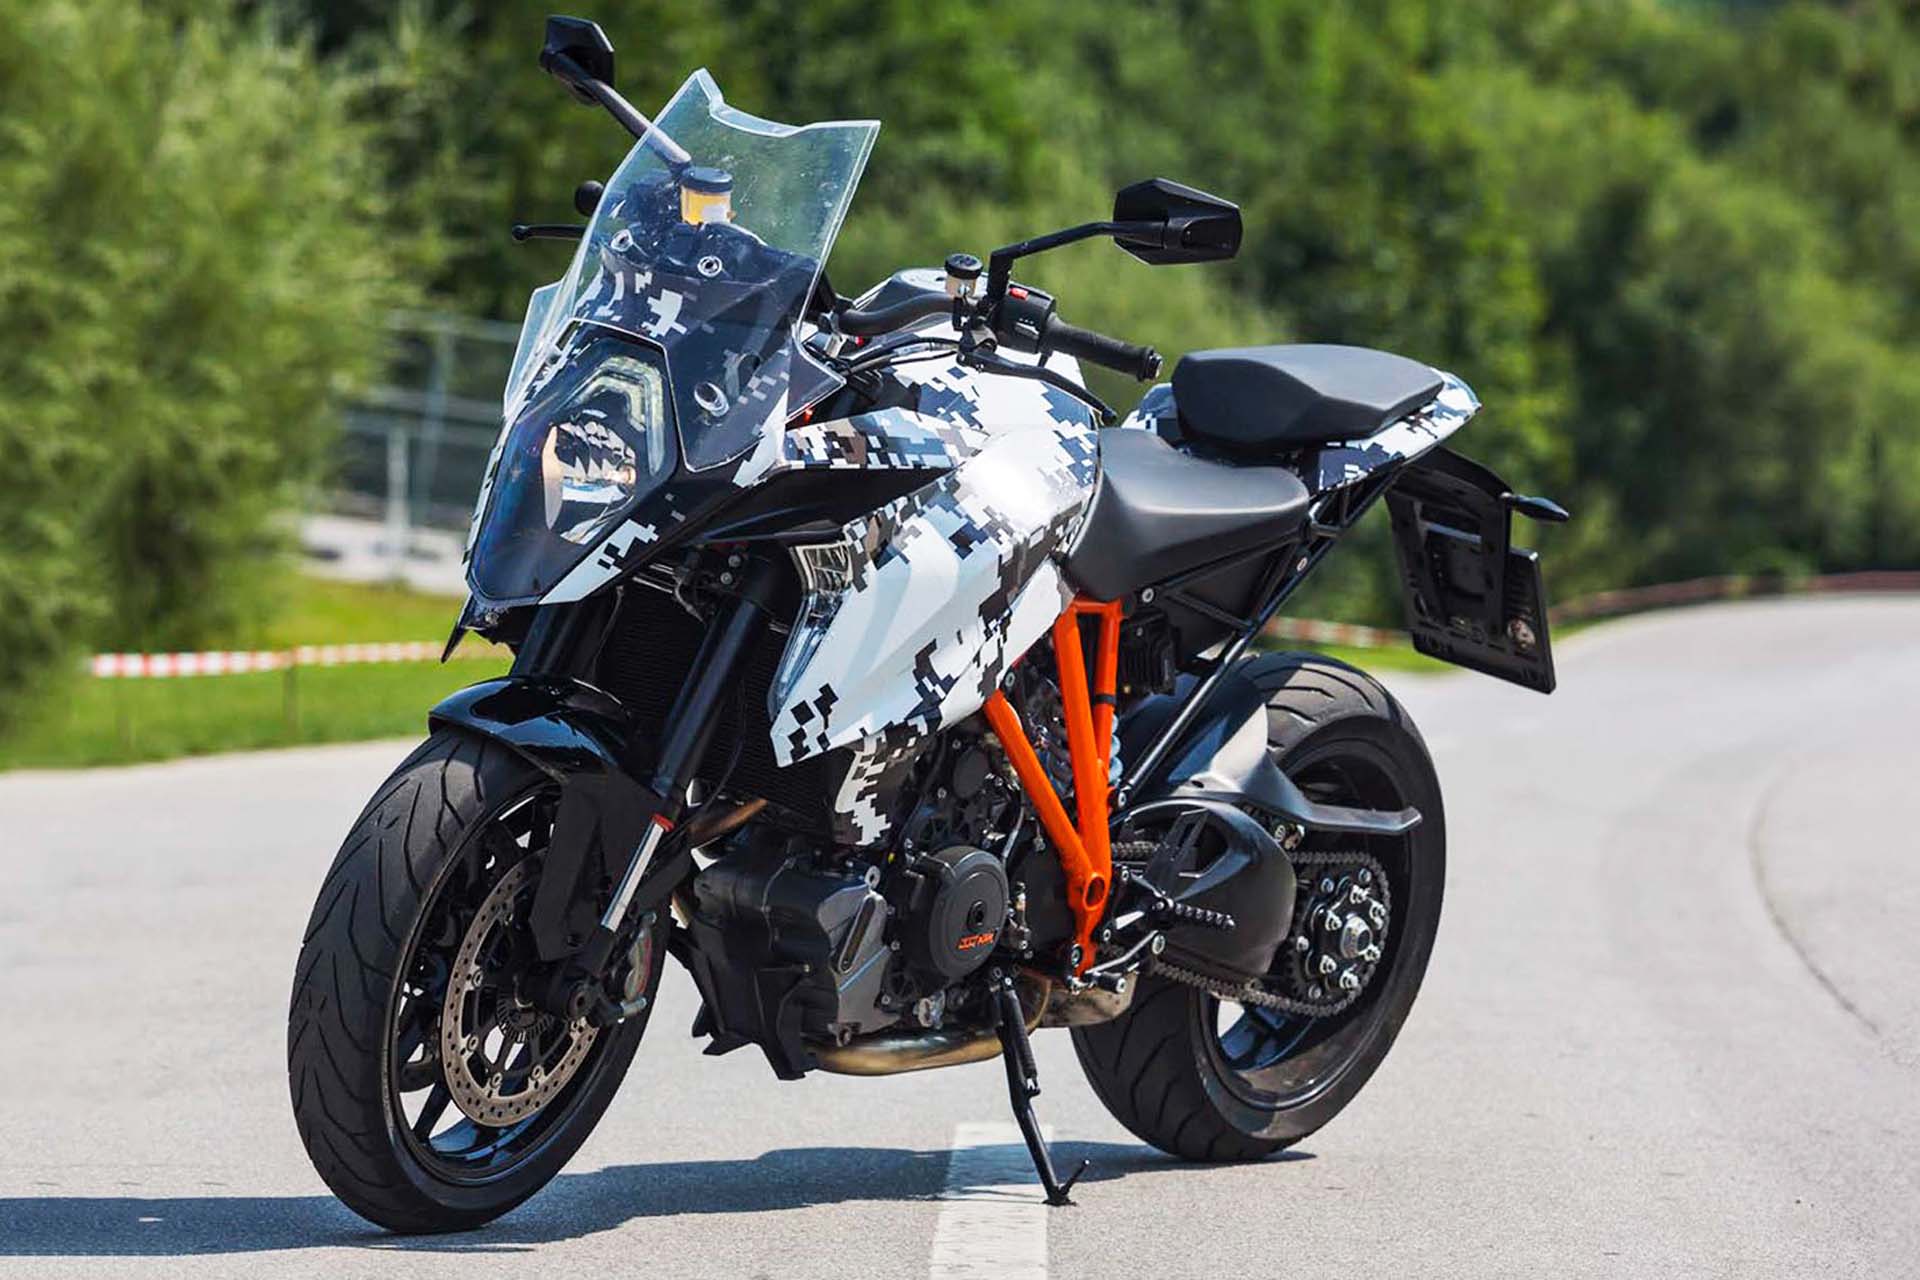 </h2>
<p>With cornering headlights, cruise control and eight-way adjustable windscreen, the Super Duke GT is clearly aimed at the touring set. Right? Well, that depends; do the touring set also like a whopping 180+ hp, semi-active suspension and an ultra-light street brawler that will twist your face off? The GT overlaps a little with both the R and the Super Adventure, but that’s okay – riders like choice.